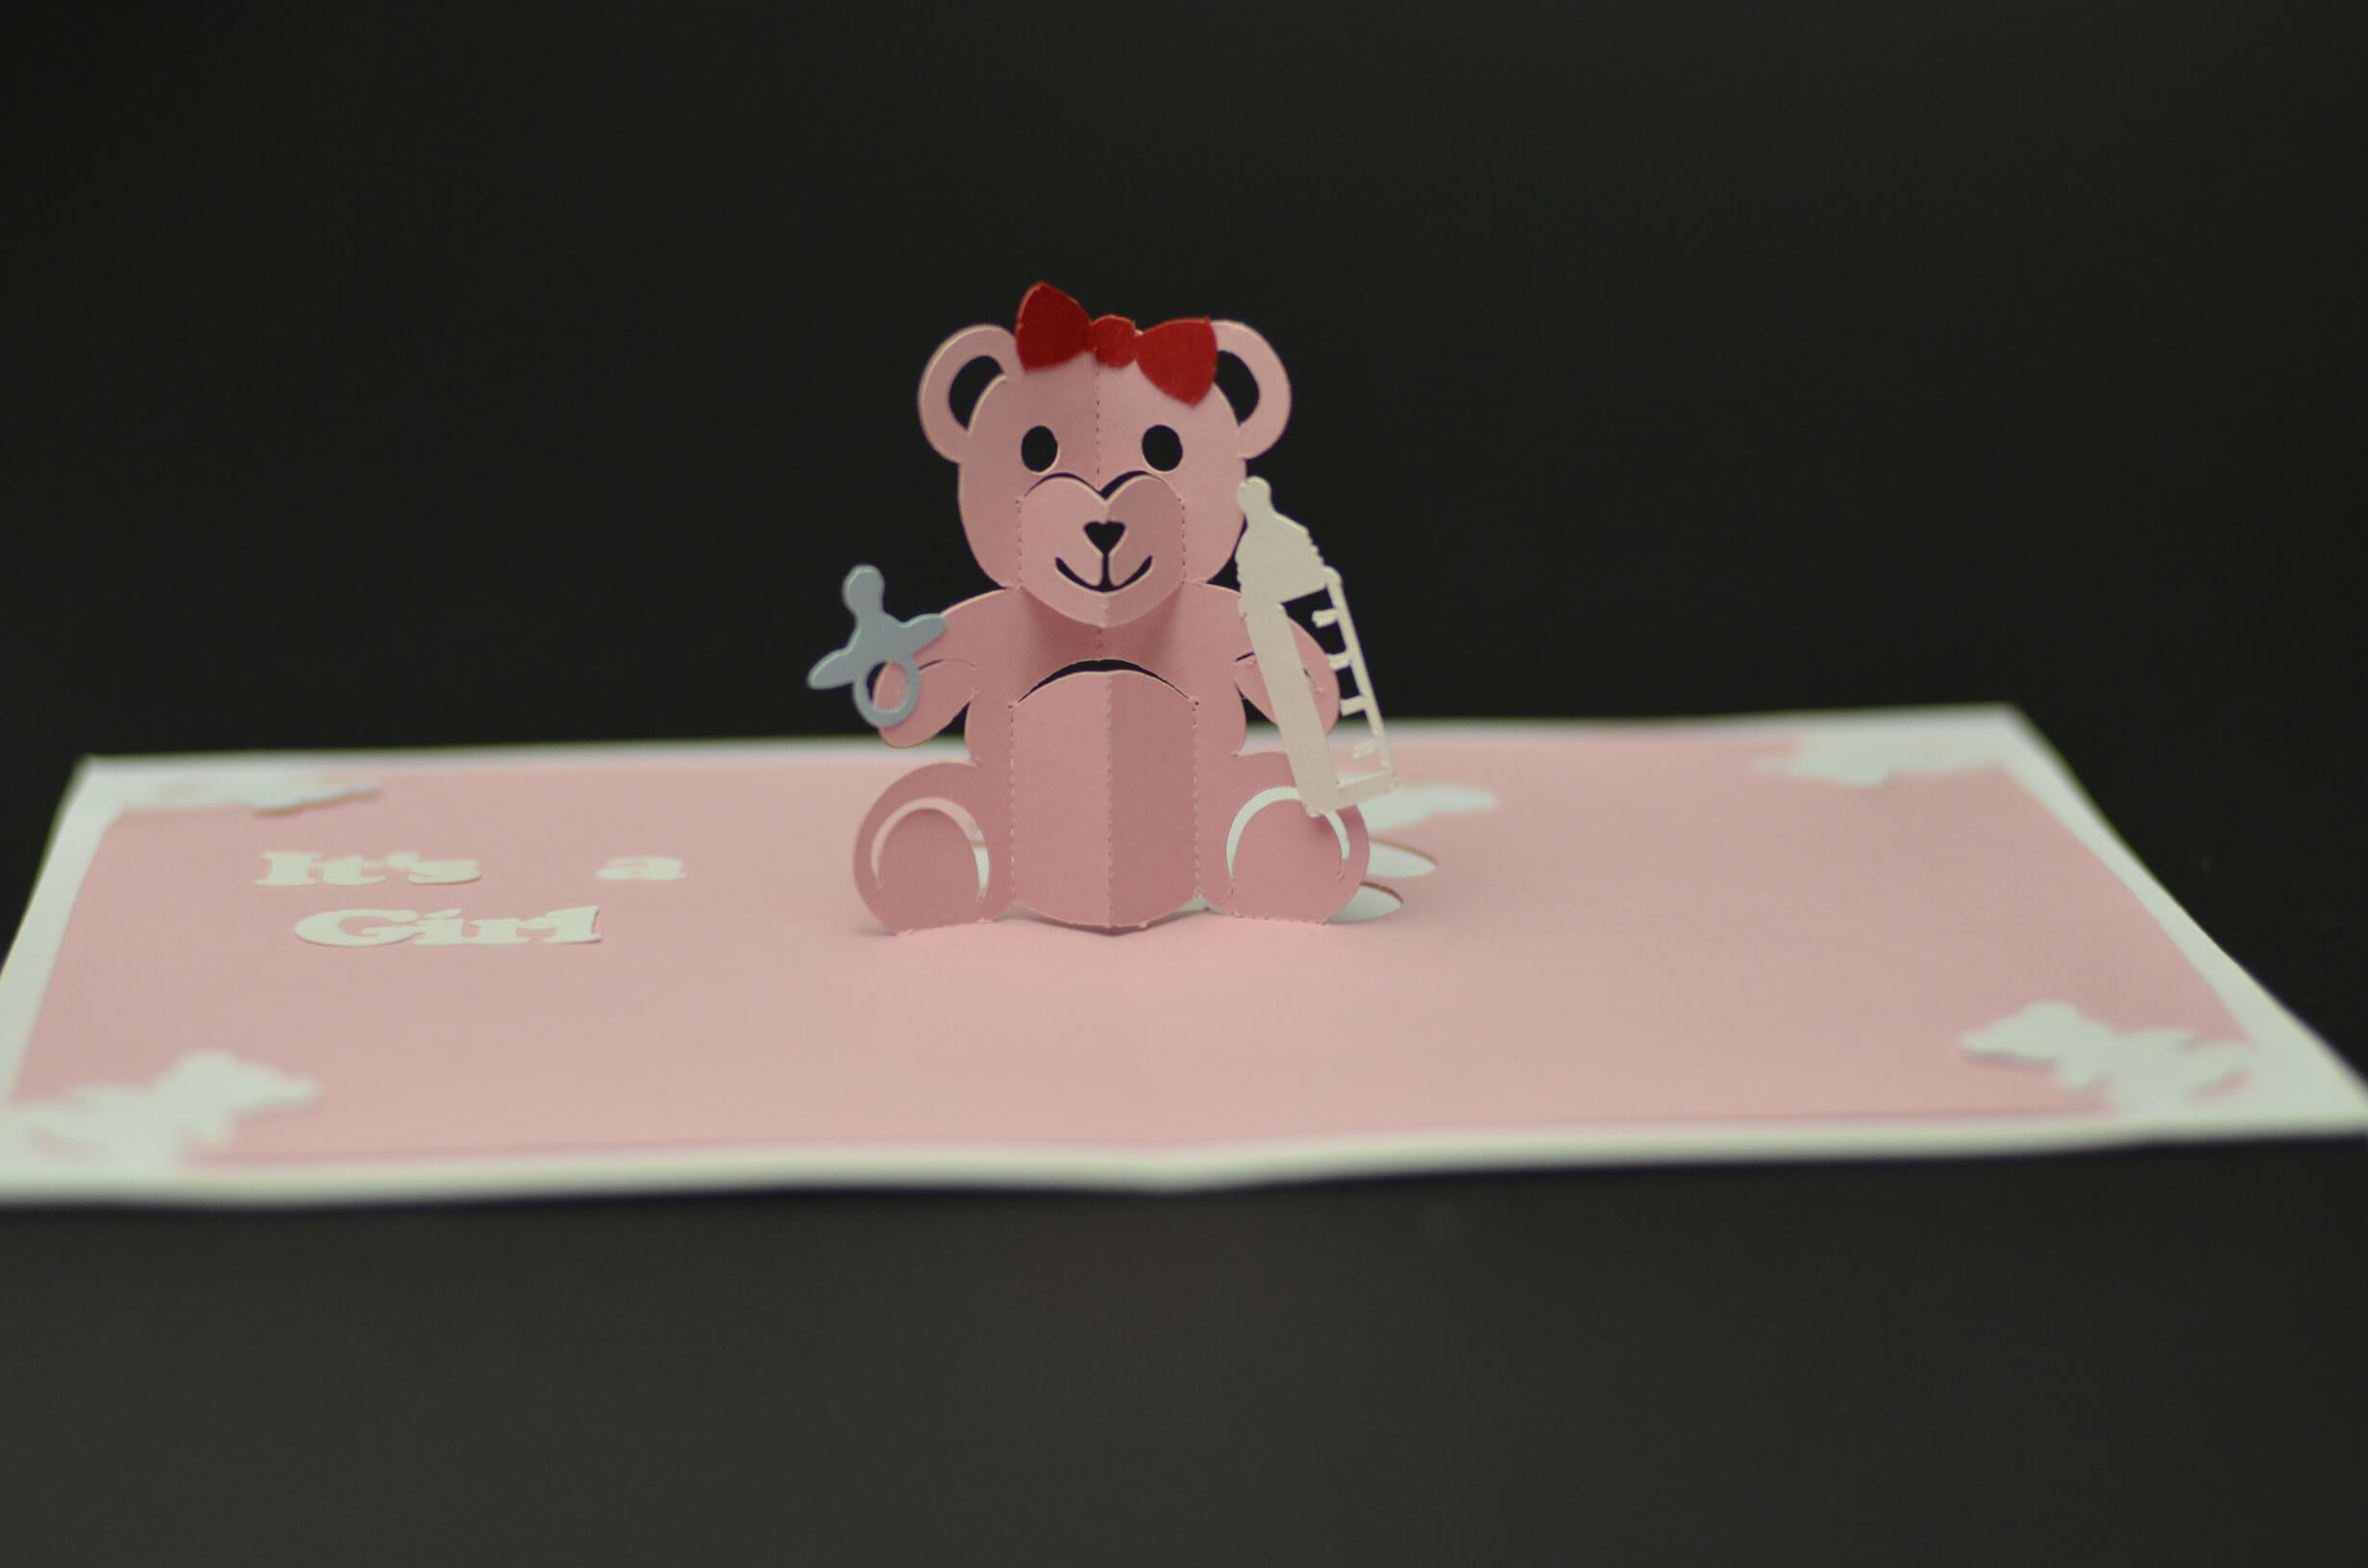 Chocoviolet: How To Make Teddy Bear Pop Up Card Within Wedding Pop Up Card Template Free